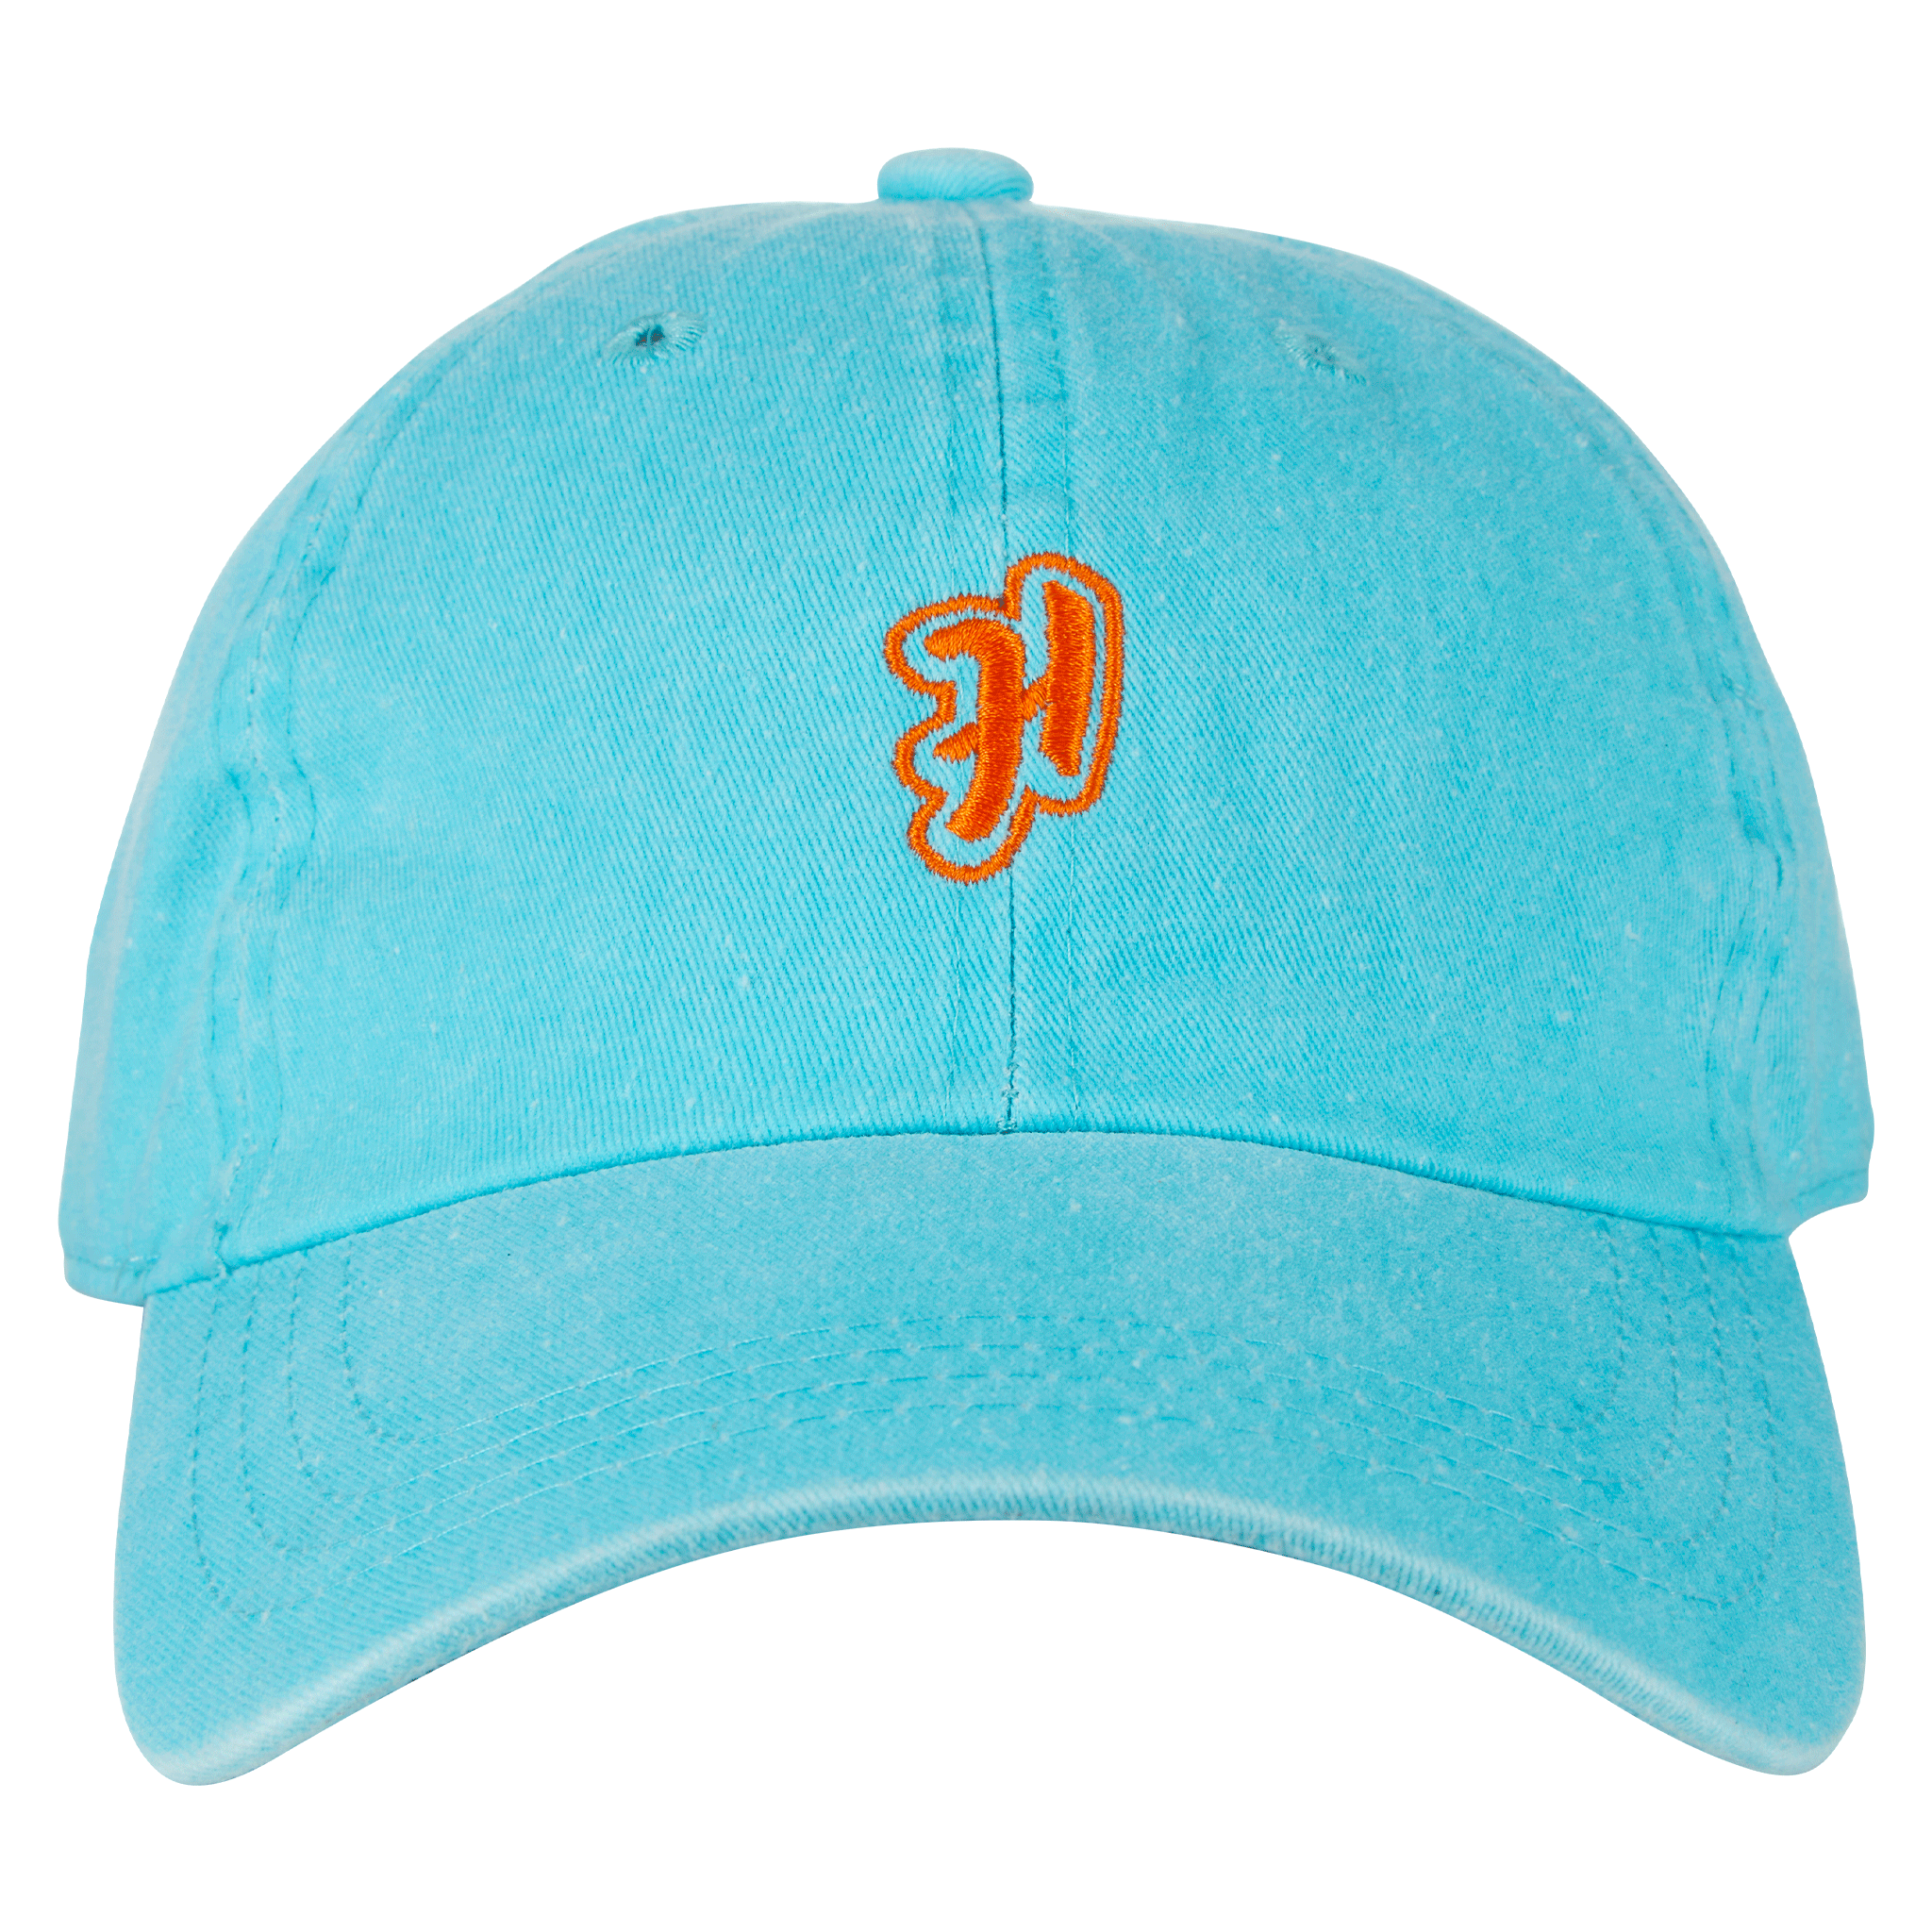 Limited Edition Highsman Dade County Strapback Hat